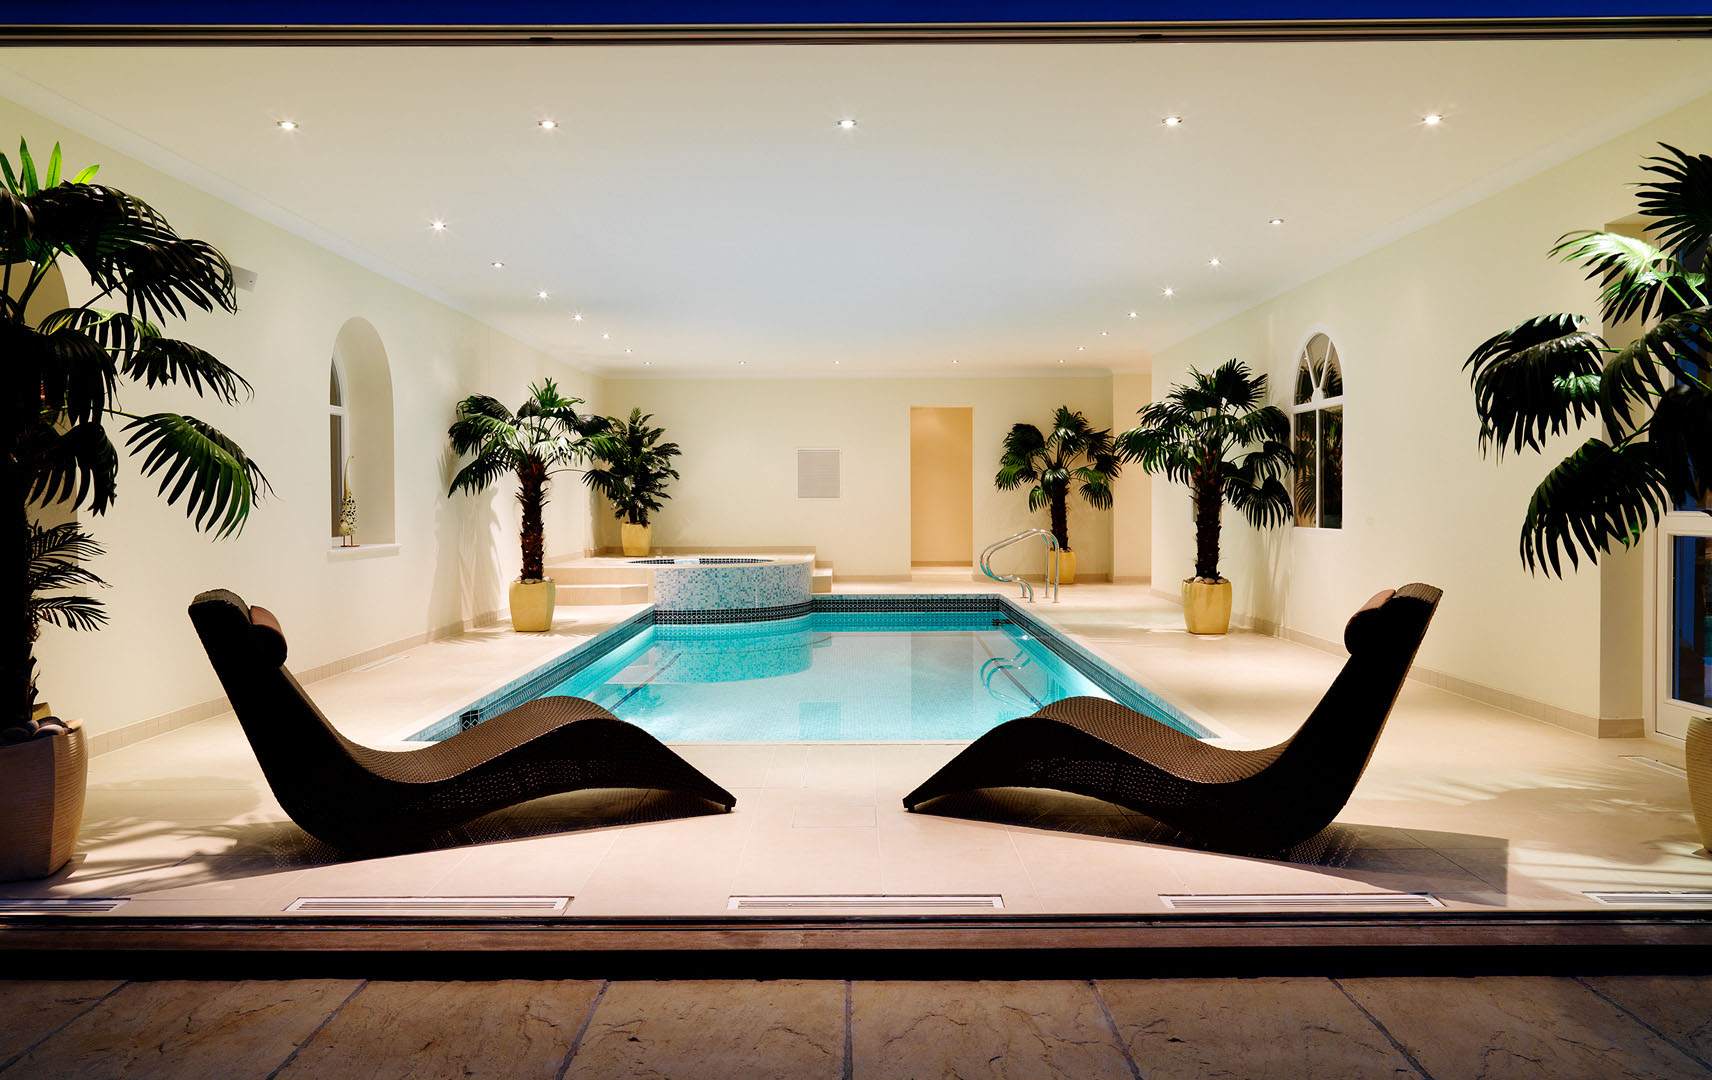 Interior with swimming pool in luxury property shot from opening doors to garden terrace